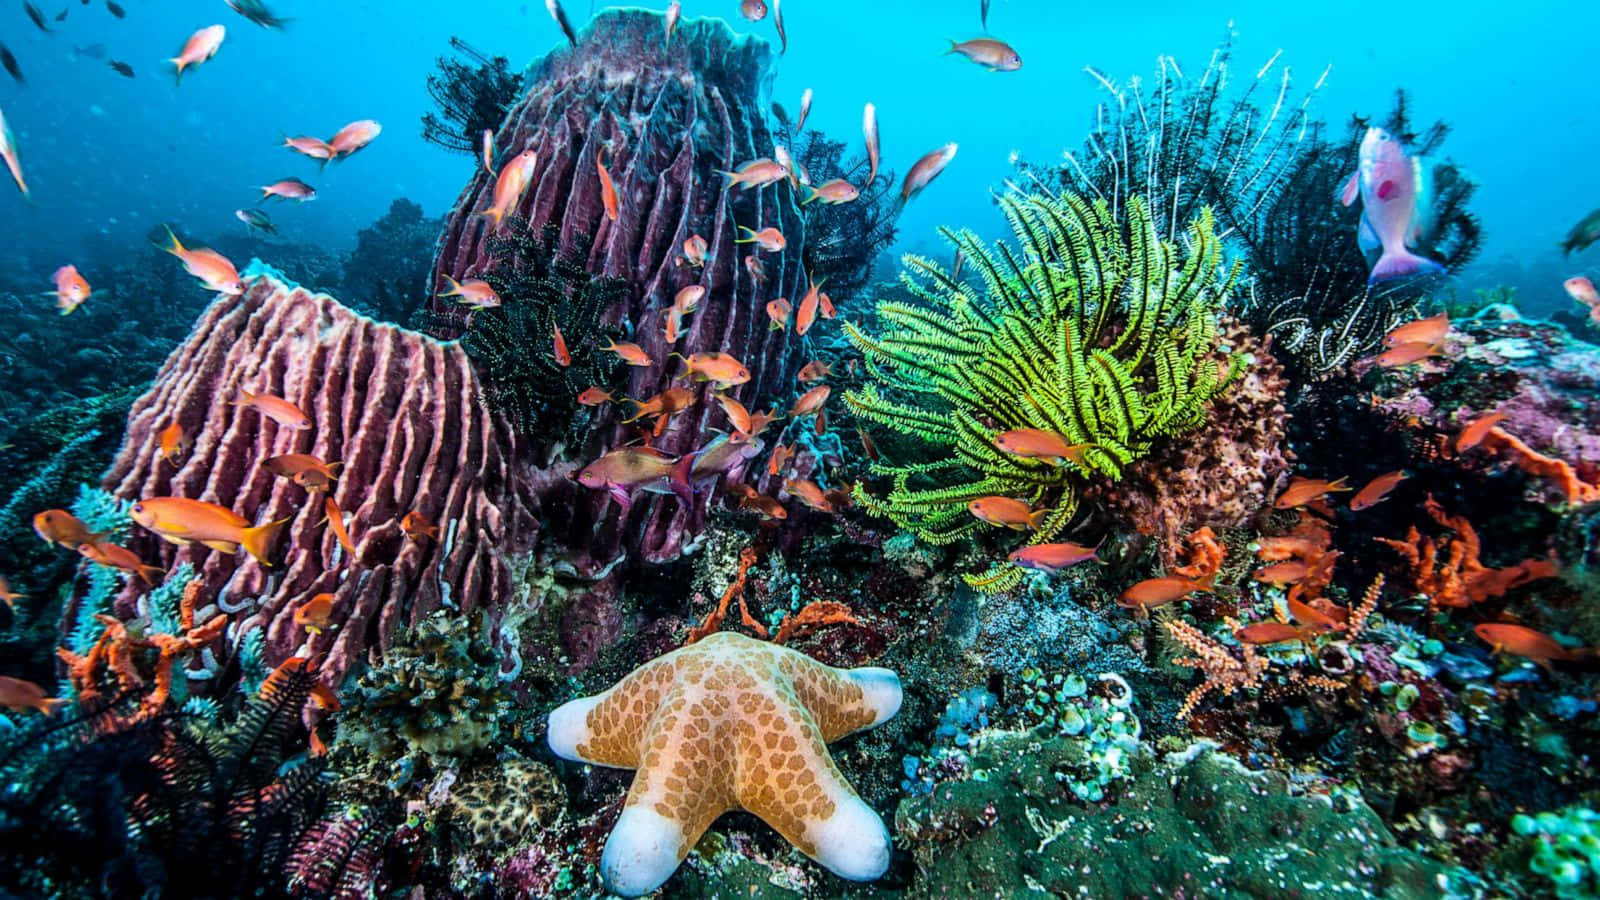 Download Coral Reef Starfish Underwater Sea Life Picture | Wallpapers.com